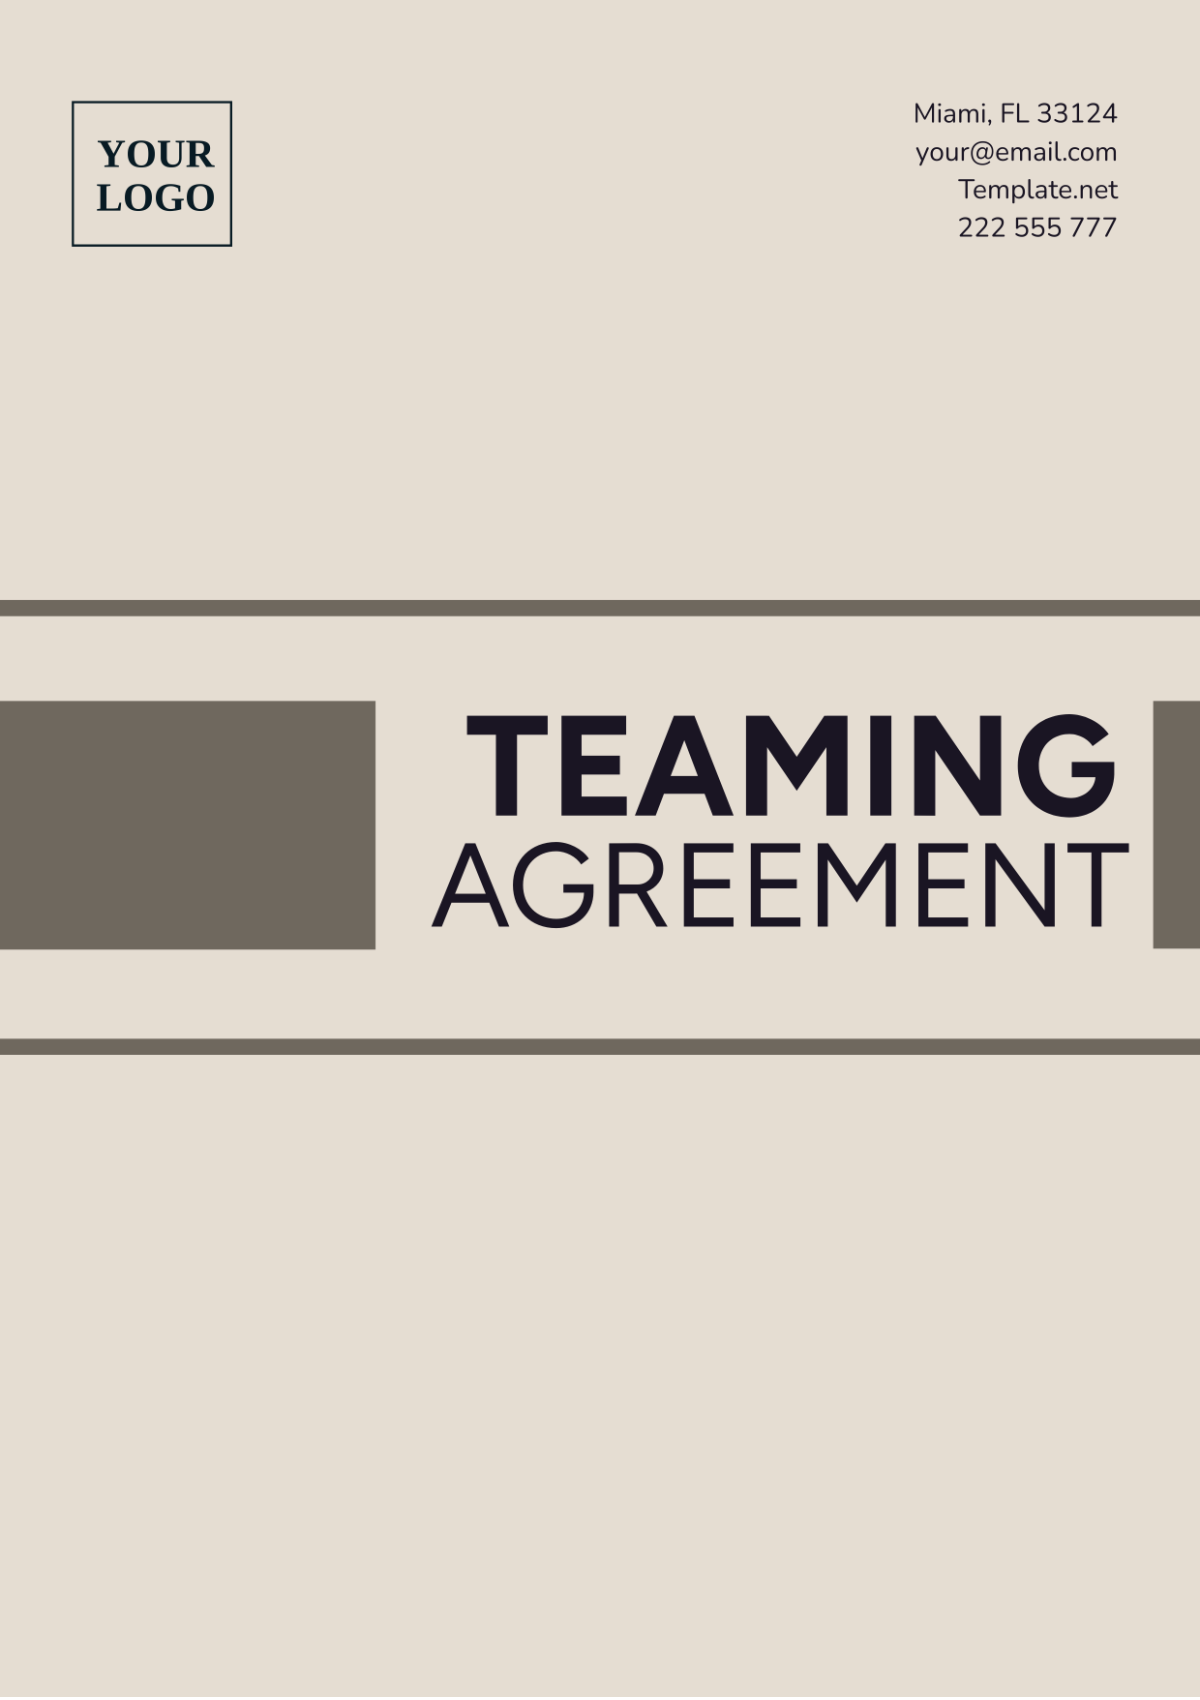 Teaming Agreement Template